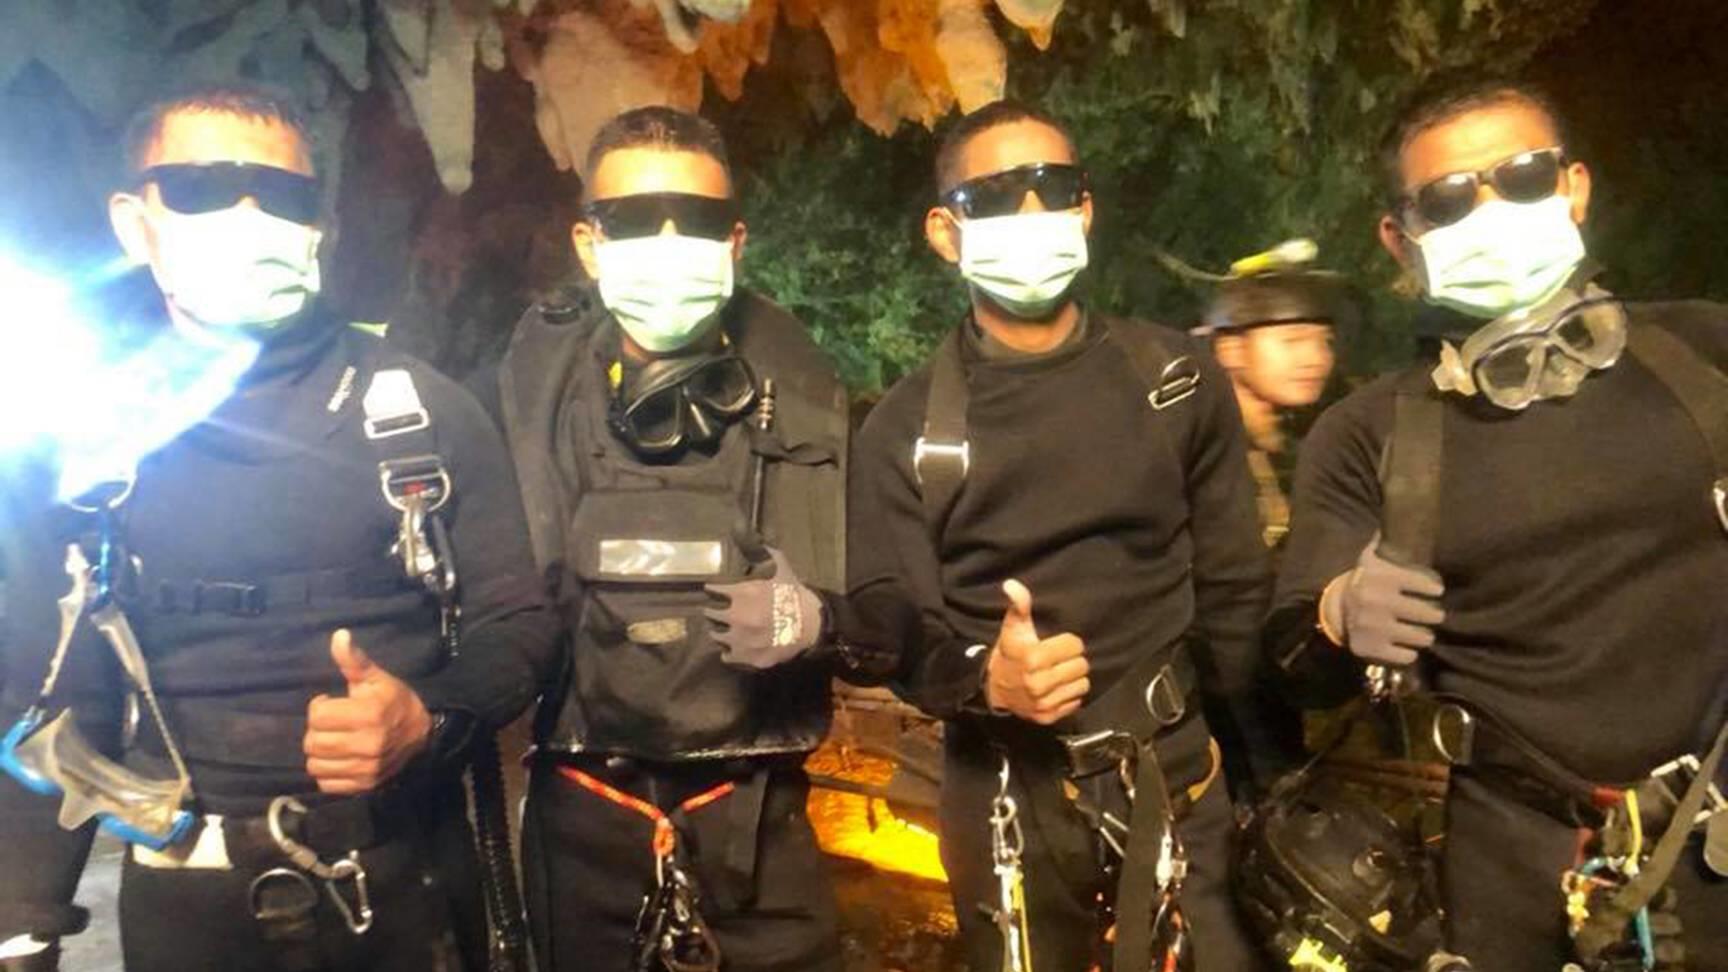 News-Bilder des Tages (180710) -- CHIANG RAI, July 10, 2018 -- Photo released by Royal Thai Navy on July 10, 2018 shows the last four Thai Navy SEAL divers coming out safely after completing the rescue mission inside the Tham Luang cave, in Chiang Ra